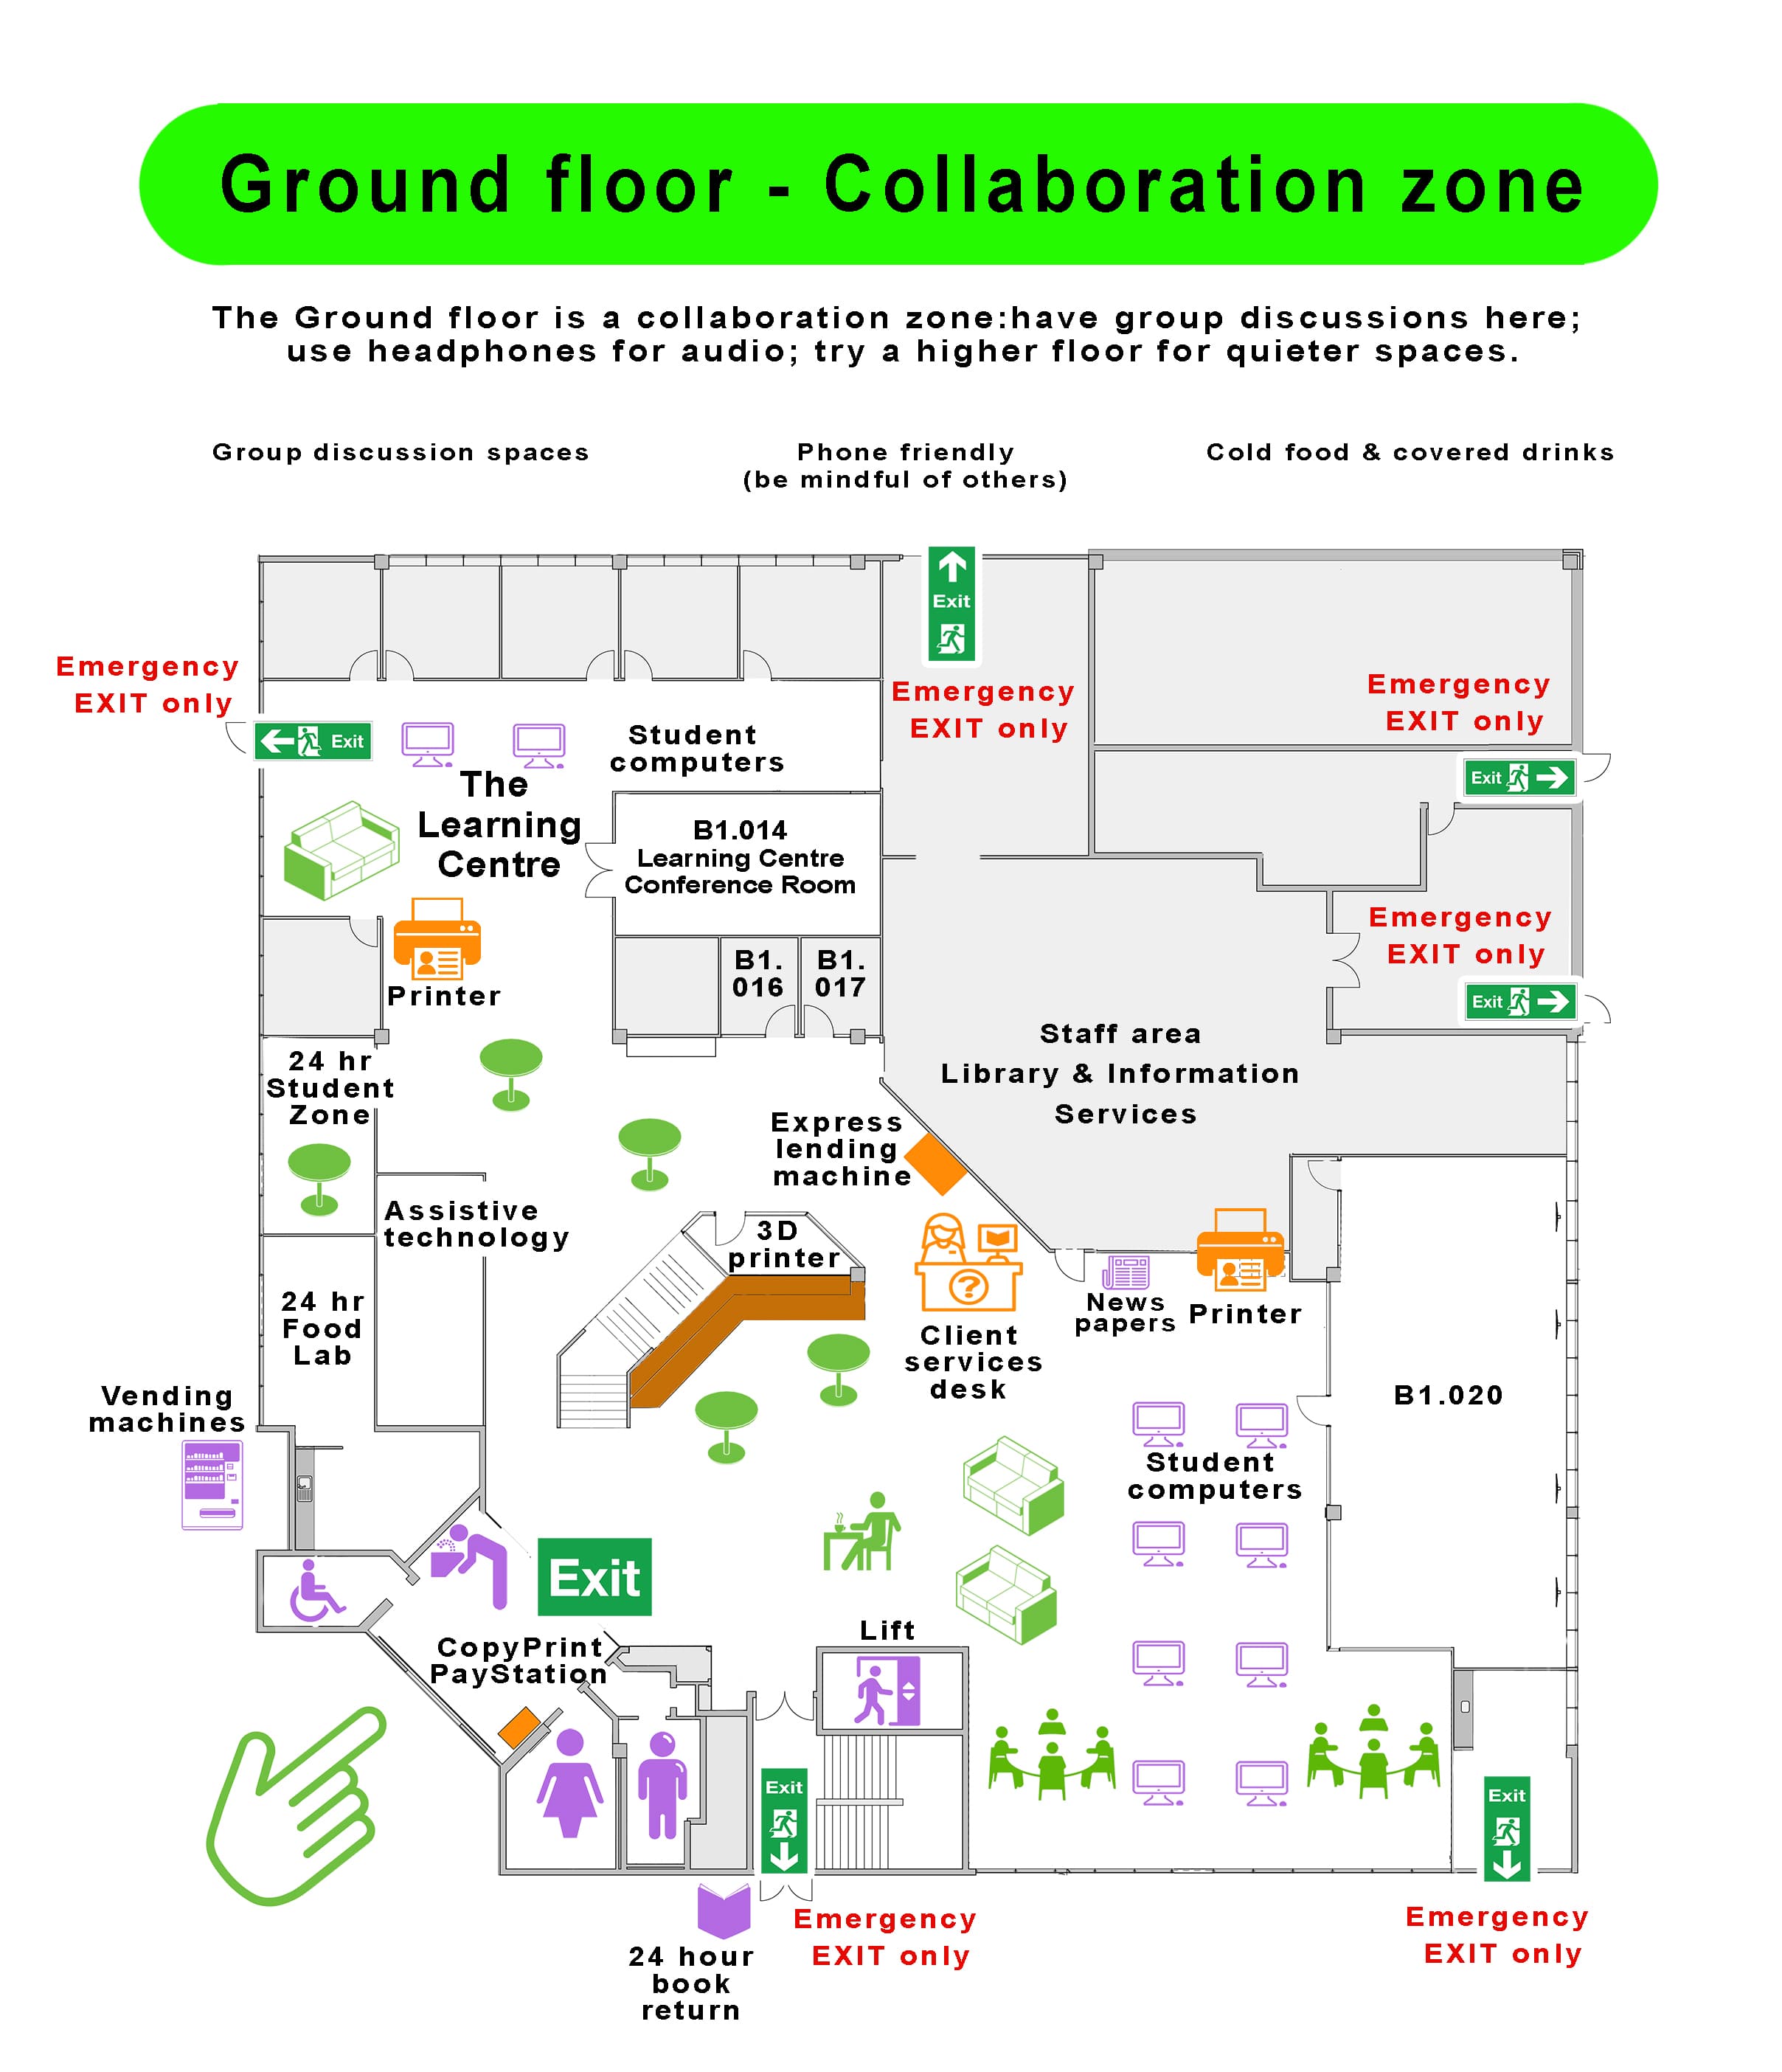 Map of the ground floor of the Cairns library